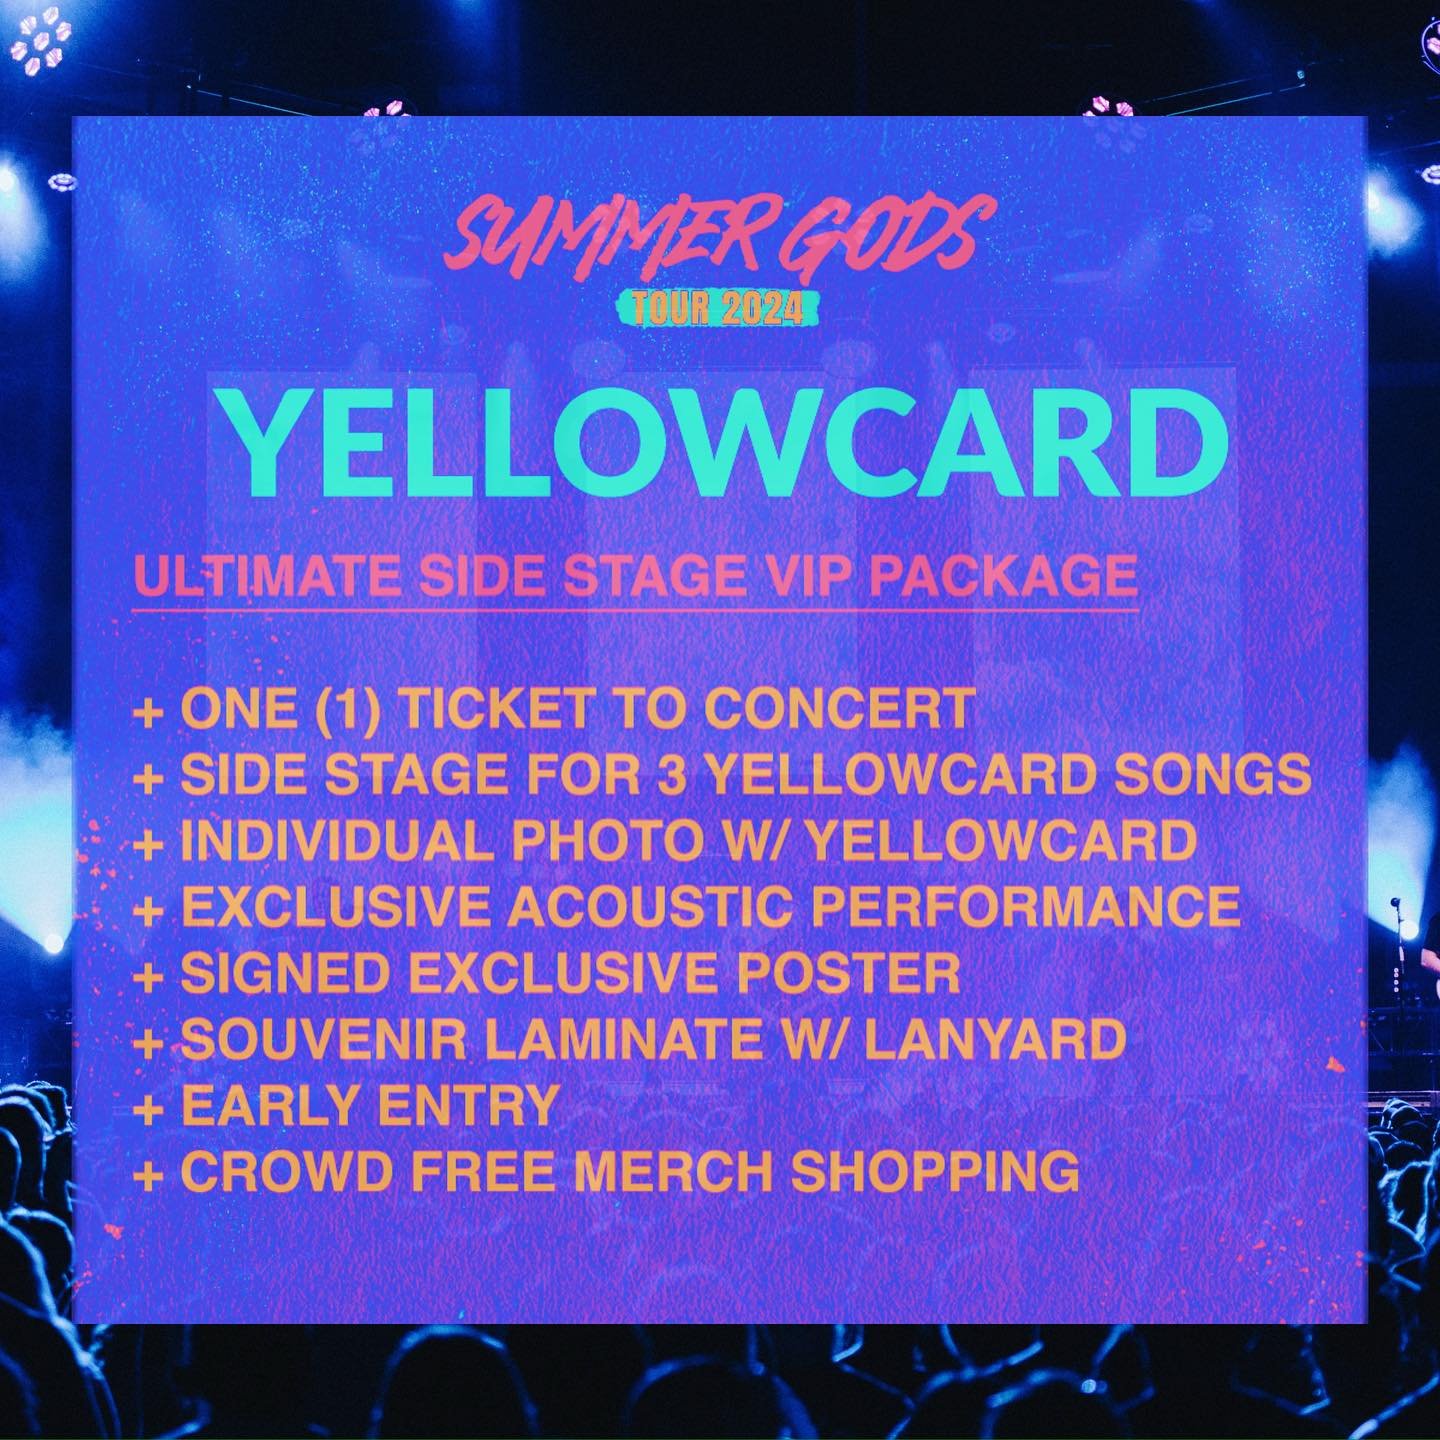 The ultimate side stage VIP package is back, along with our acoustic VIP package! Did you do either of these options last summer? Tell us what you thought in the comments👇 VIP tickets available at yellowcardband.com/shows
&bull;
&bull;
&bull;
#yello